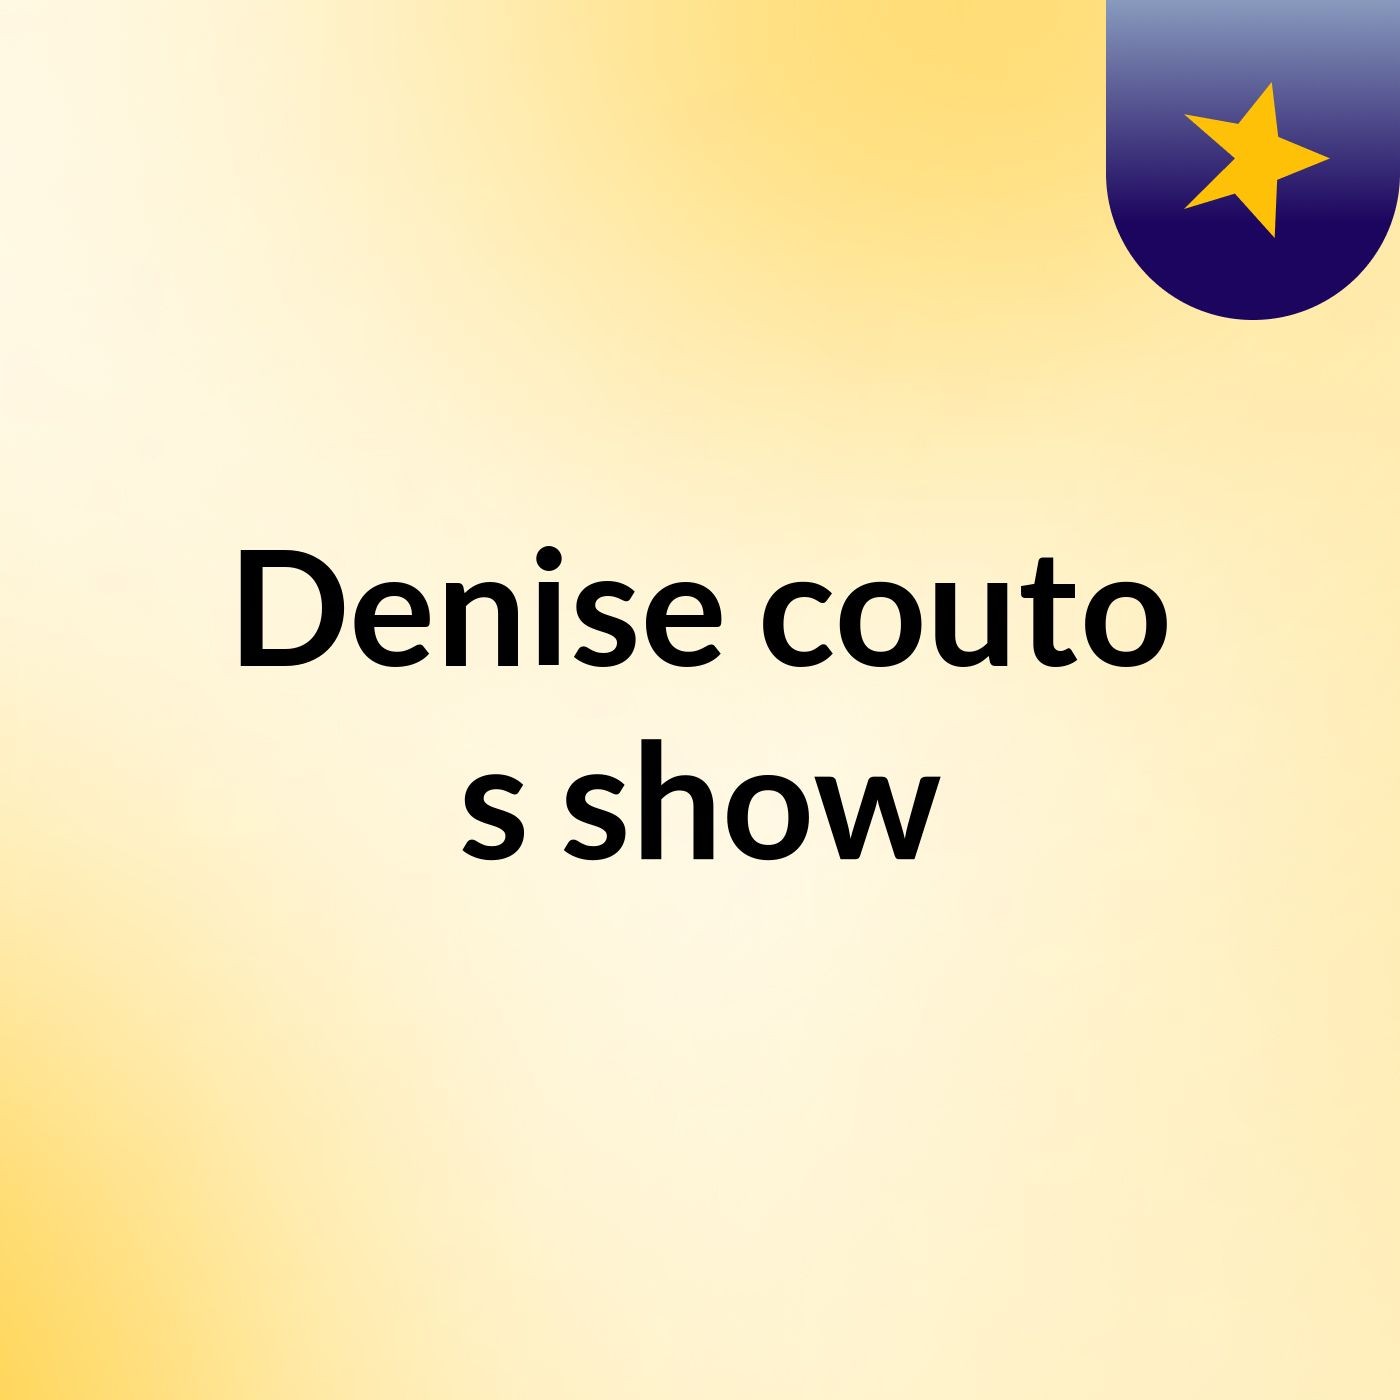 Denise couto's show